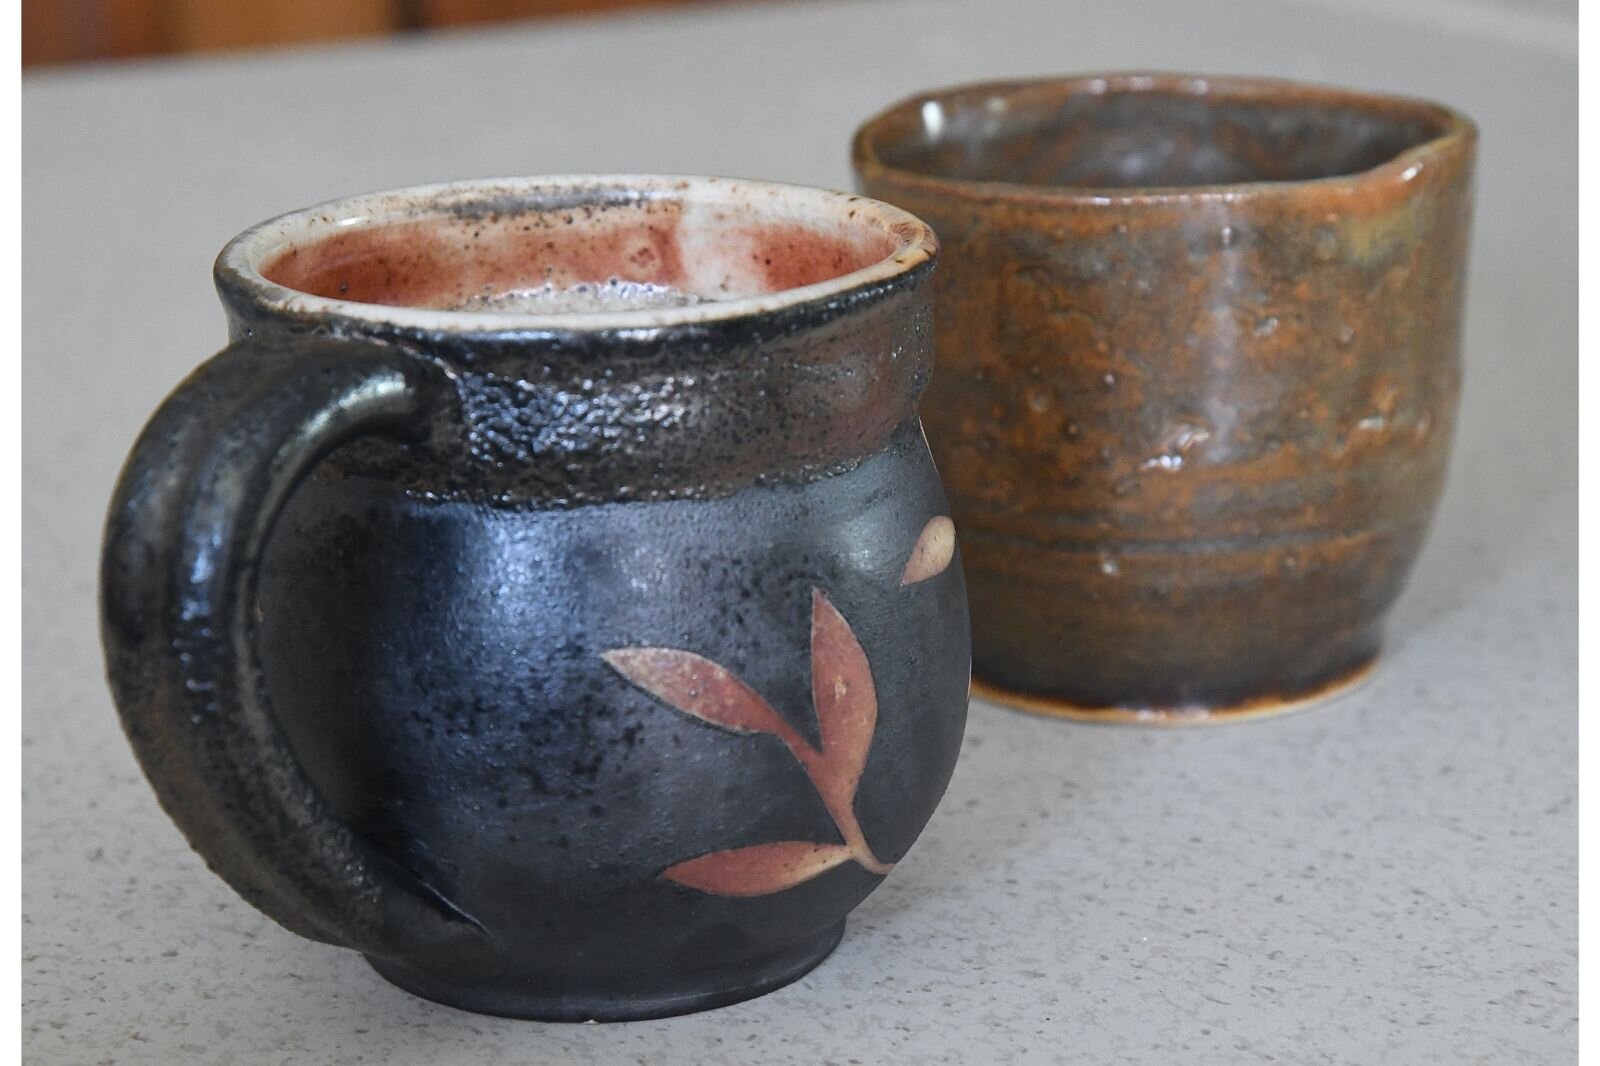 One of Laura’s favorite pieces, a cup, sits to the left of her very first creation.